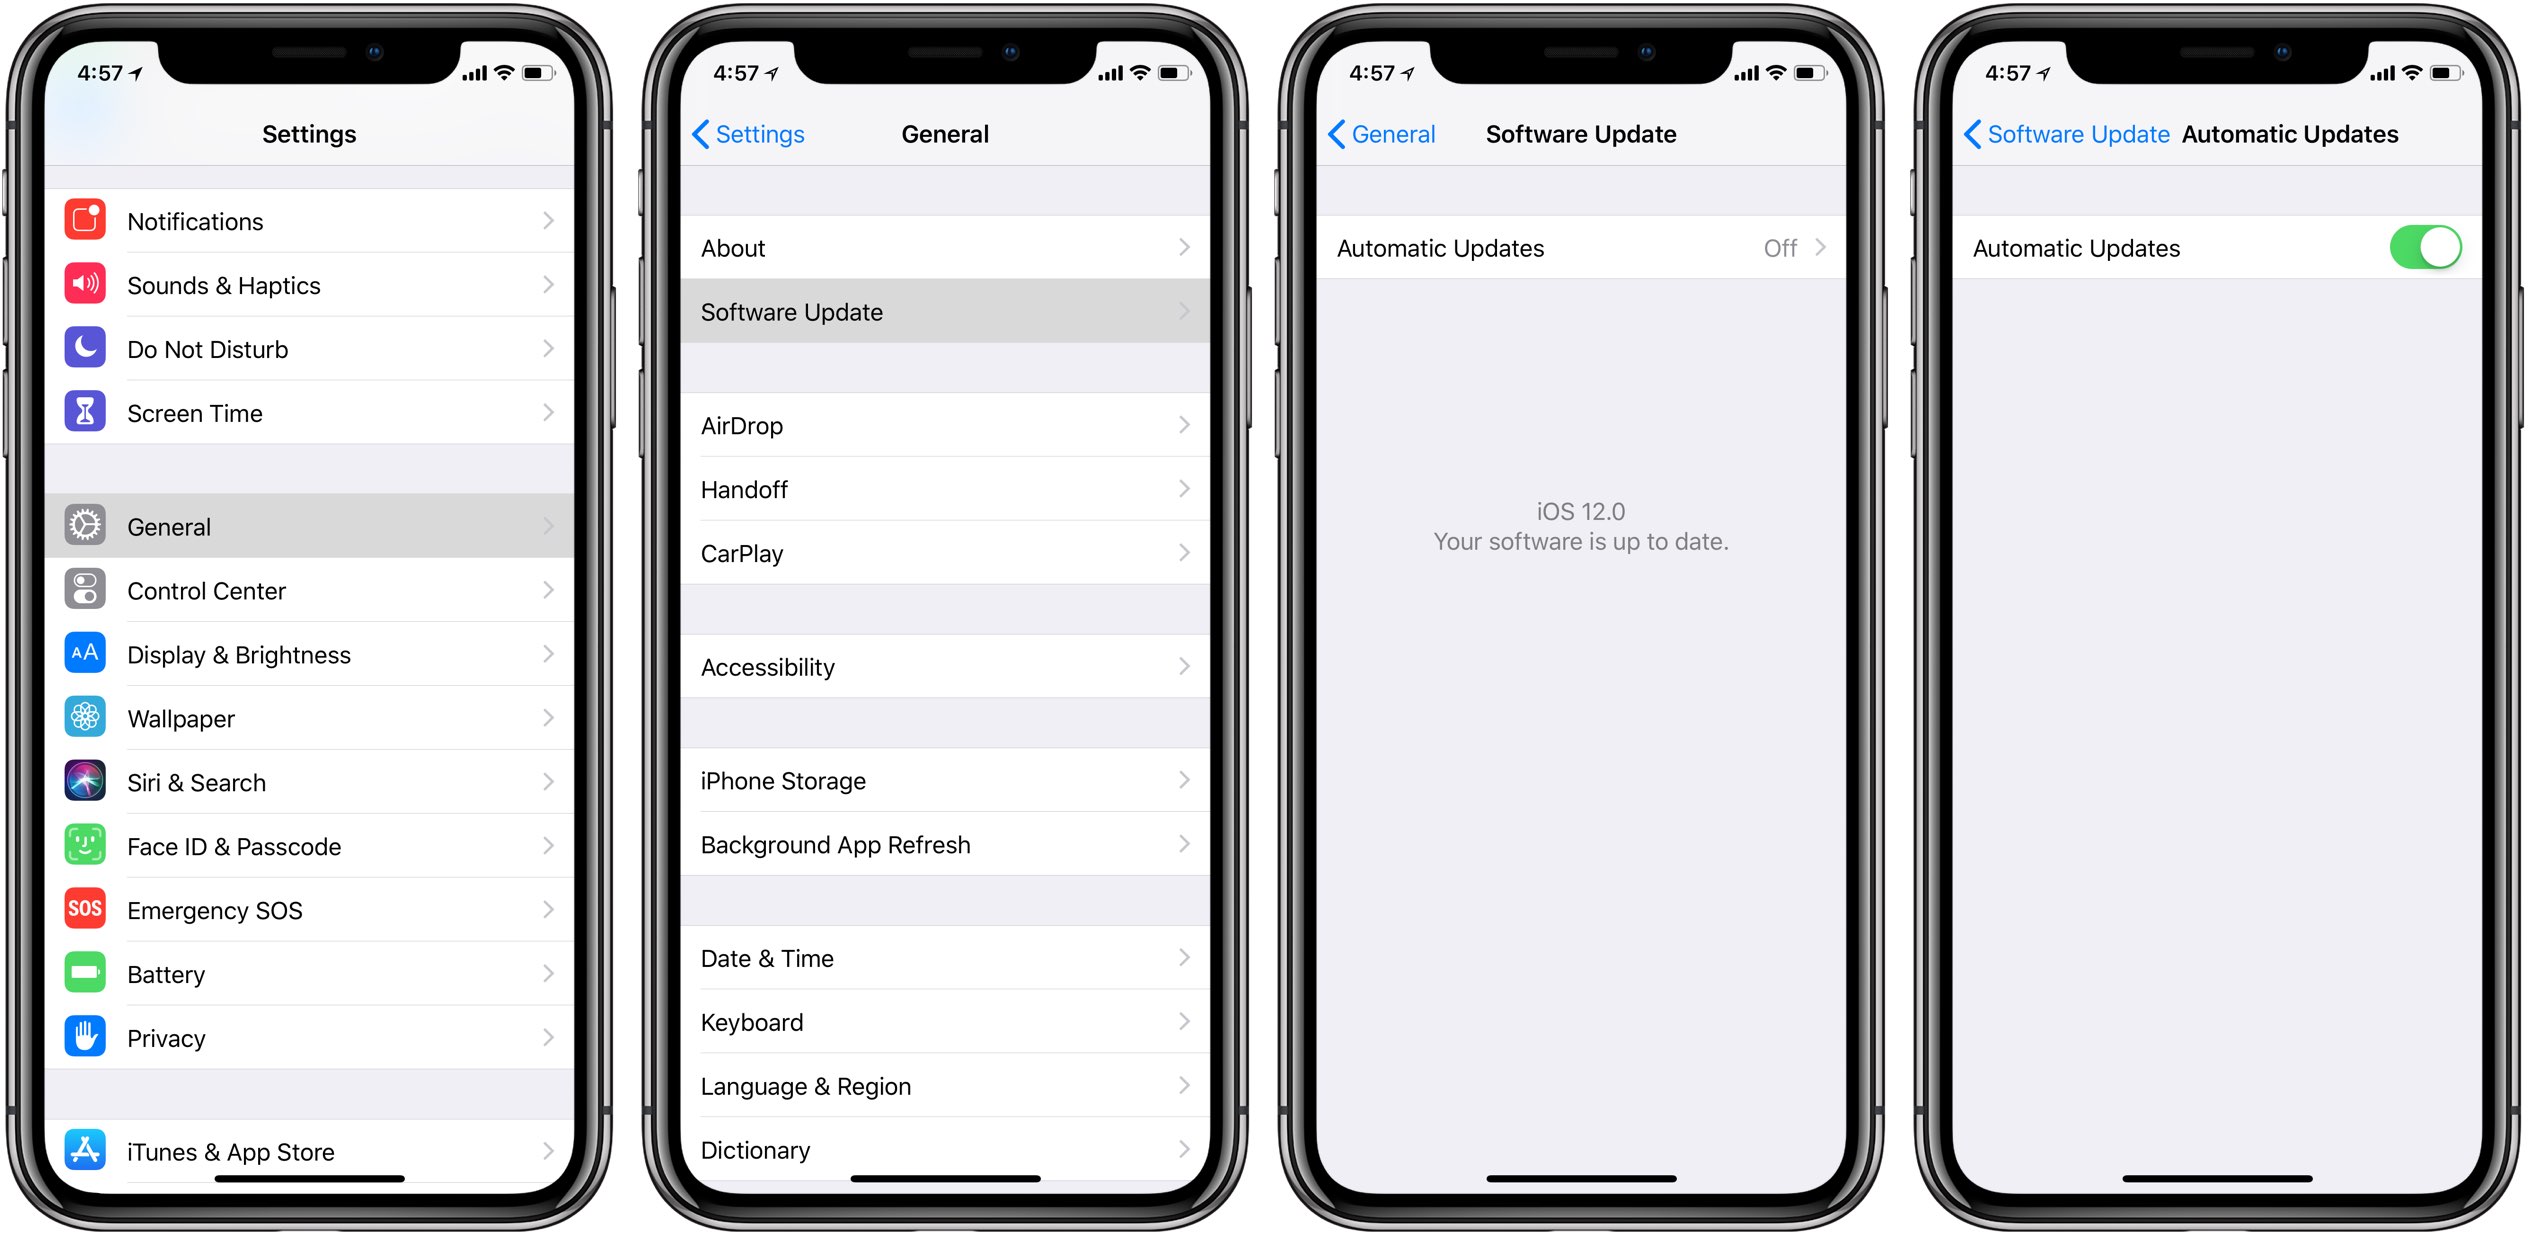 How to Update Software in iPhone